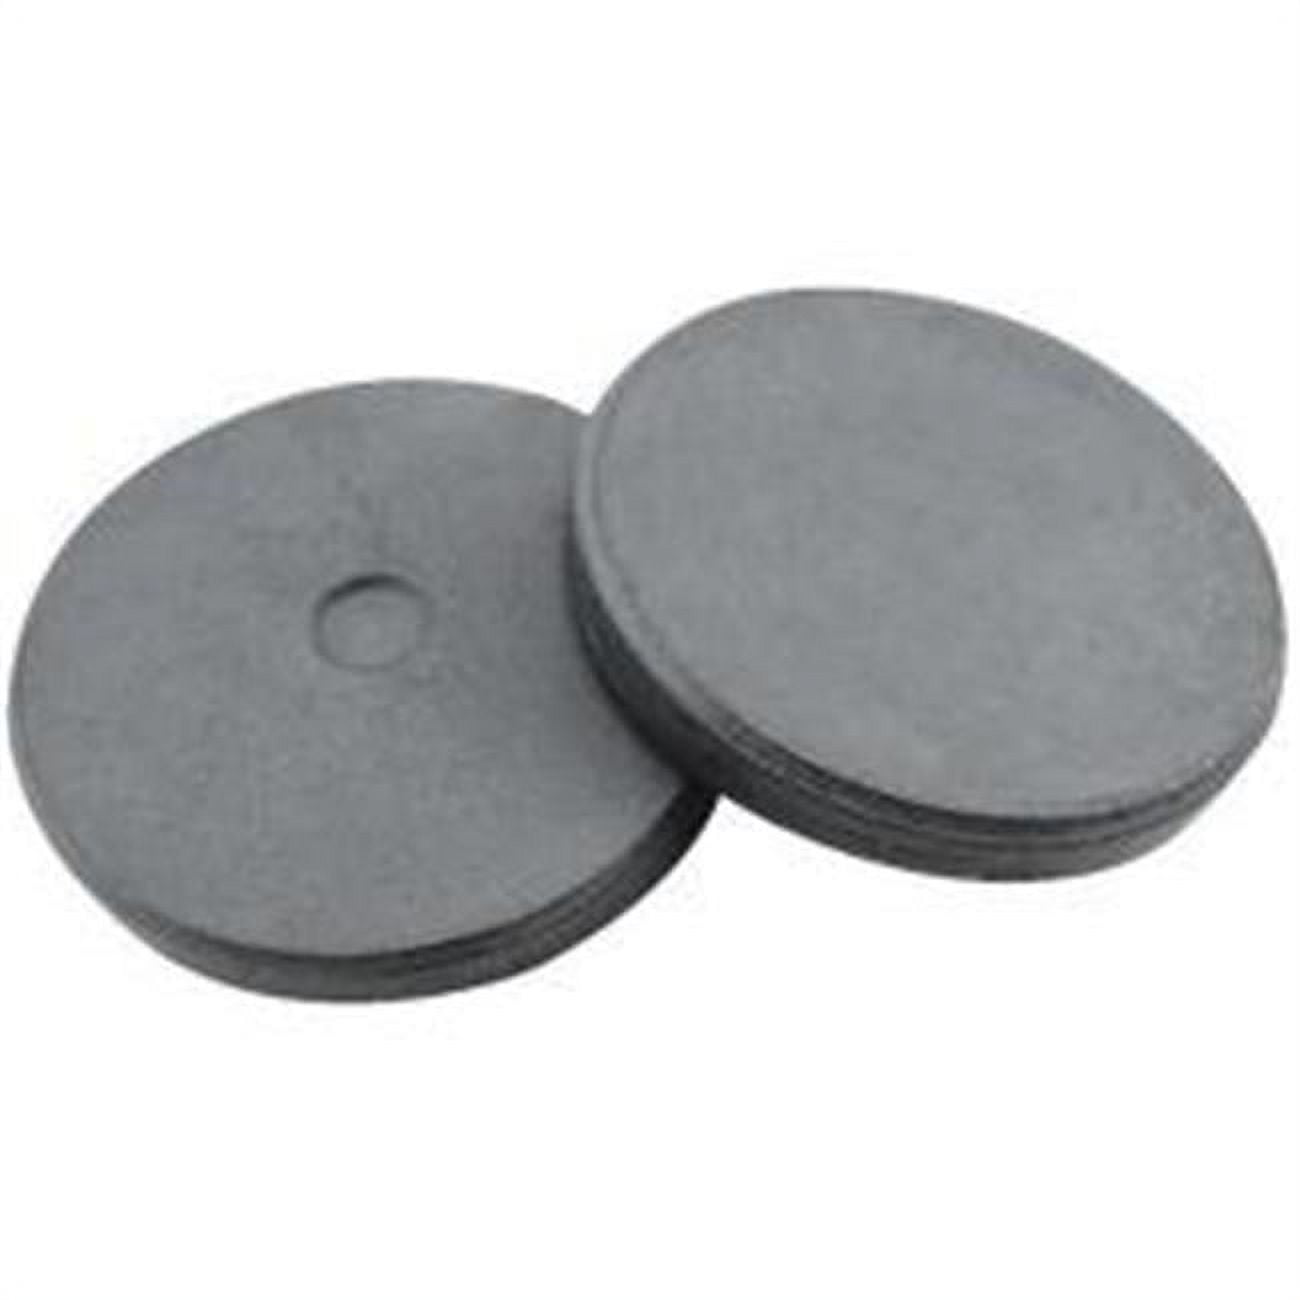 2108579 1.5 In. Ceramic Disc Magnets - Card Of 2